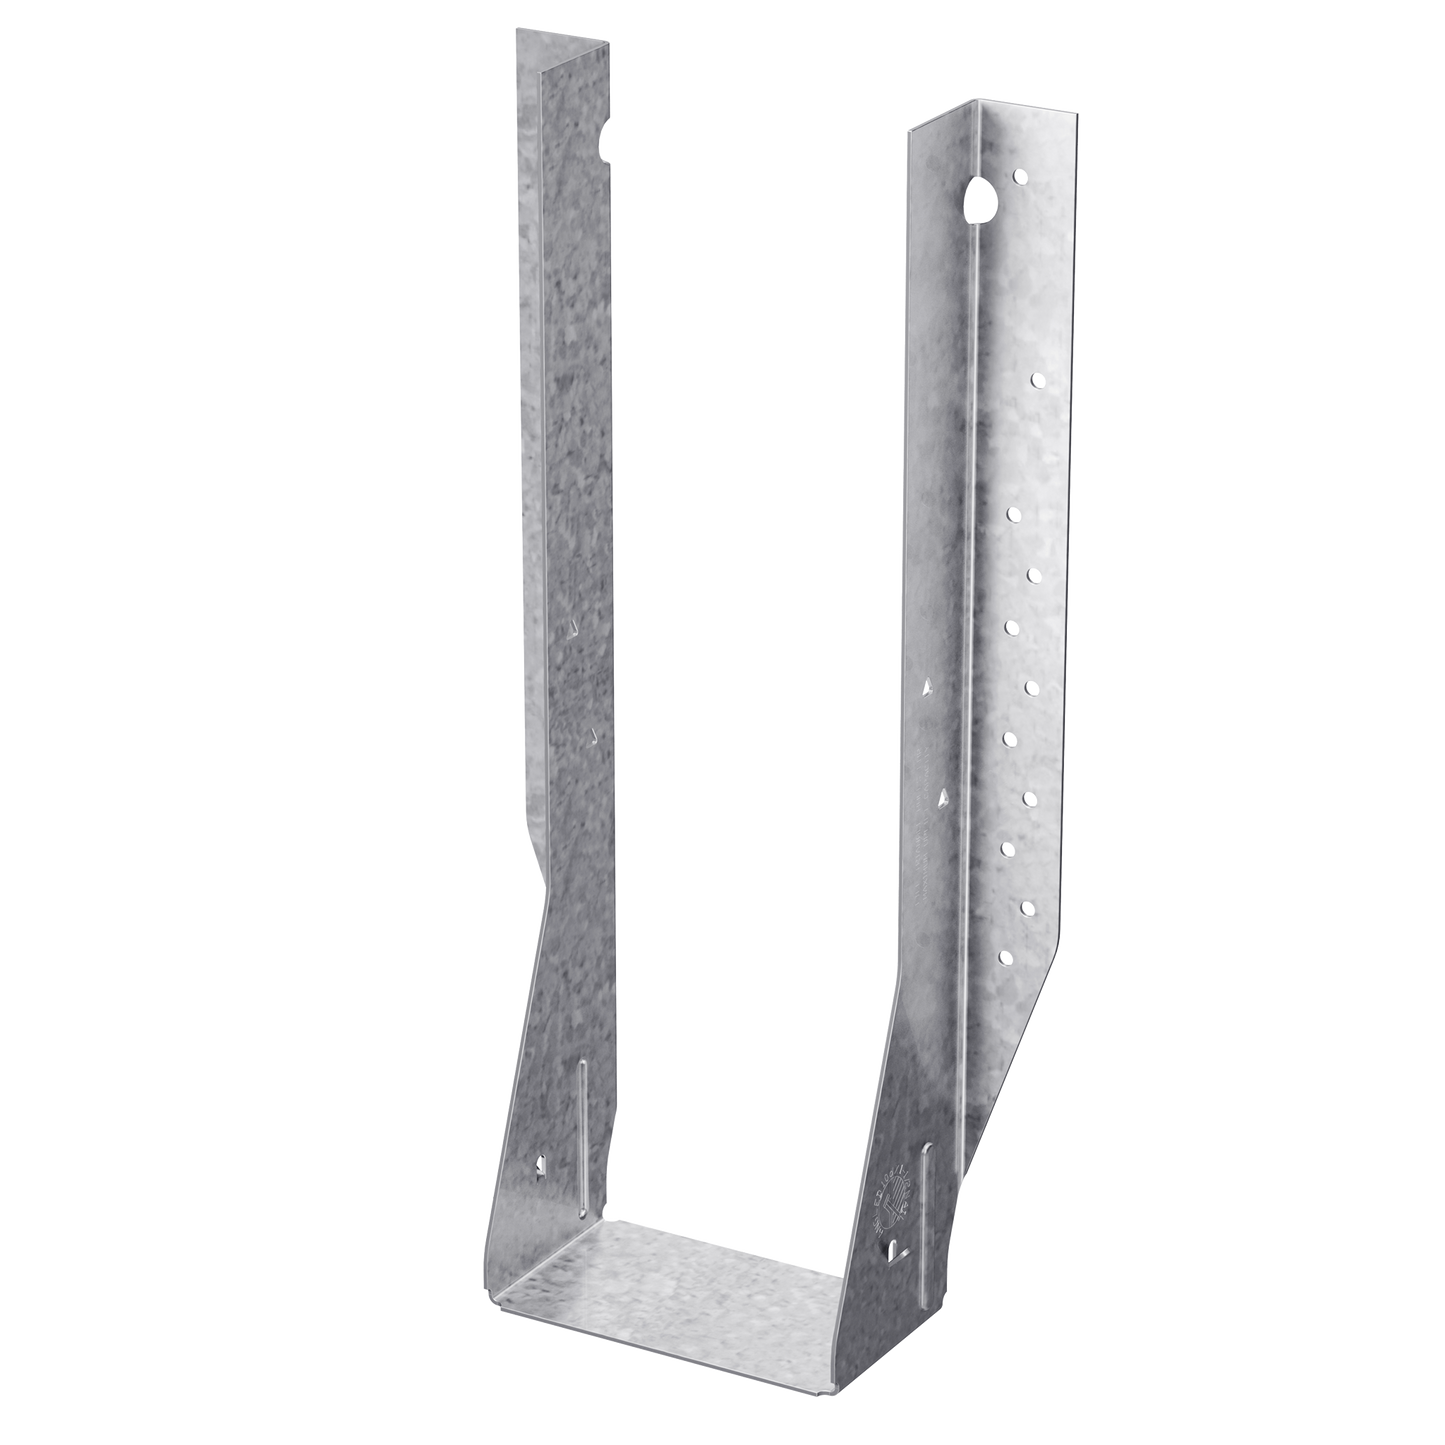 MIU Galvanized Face-Mount Joist Hanger for 4-1/8 in. x 14 in. Engineered Wood